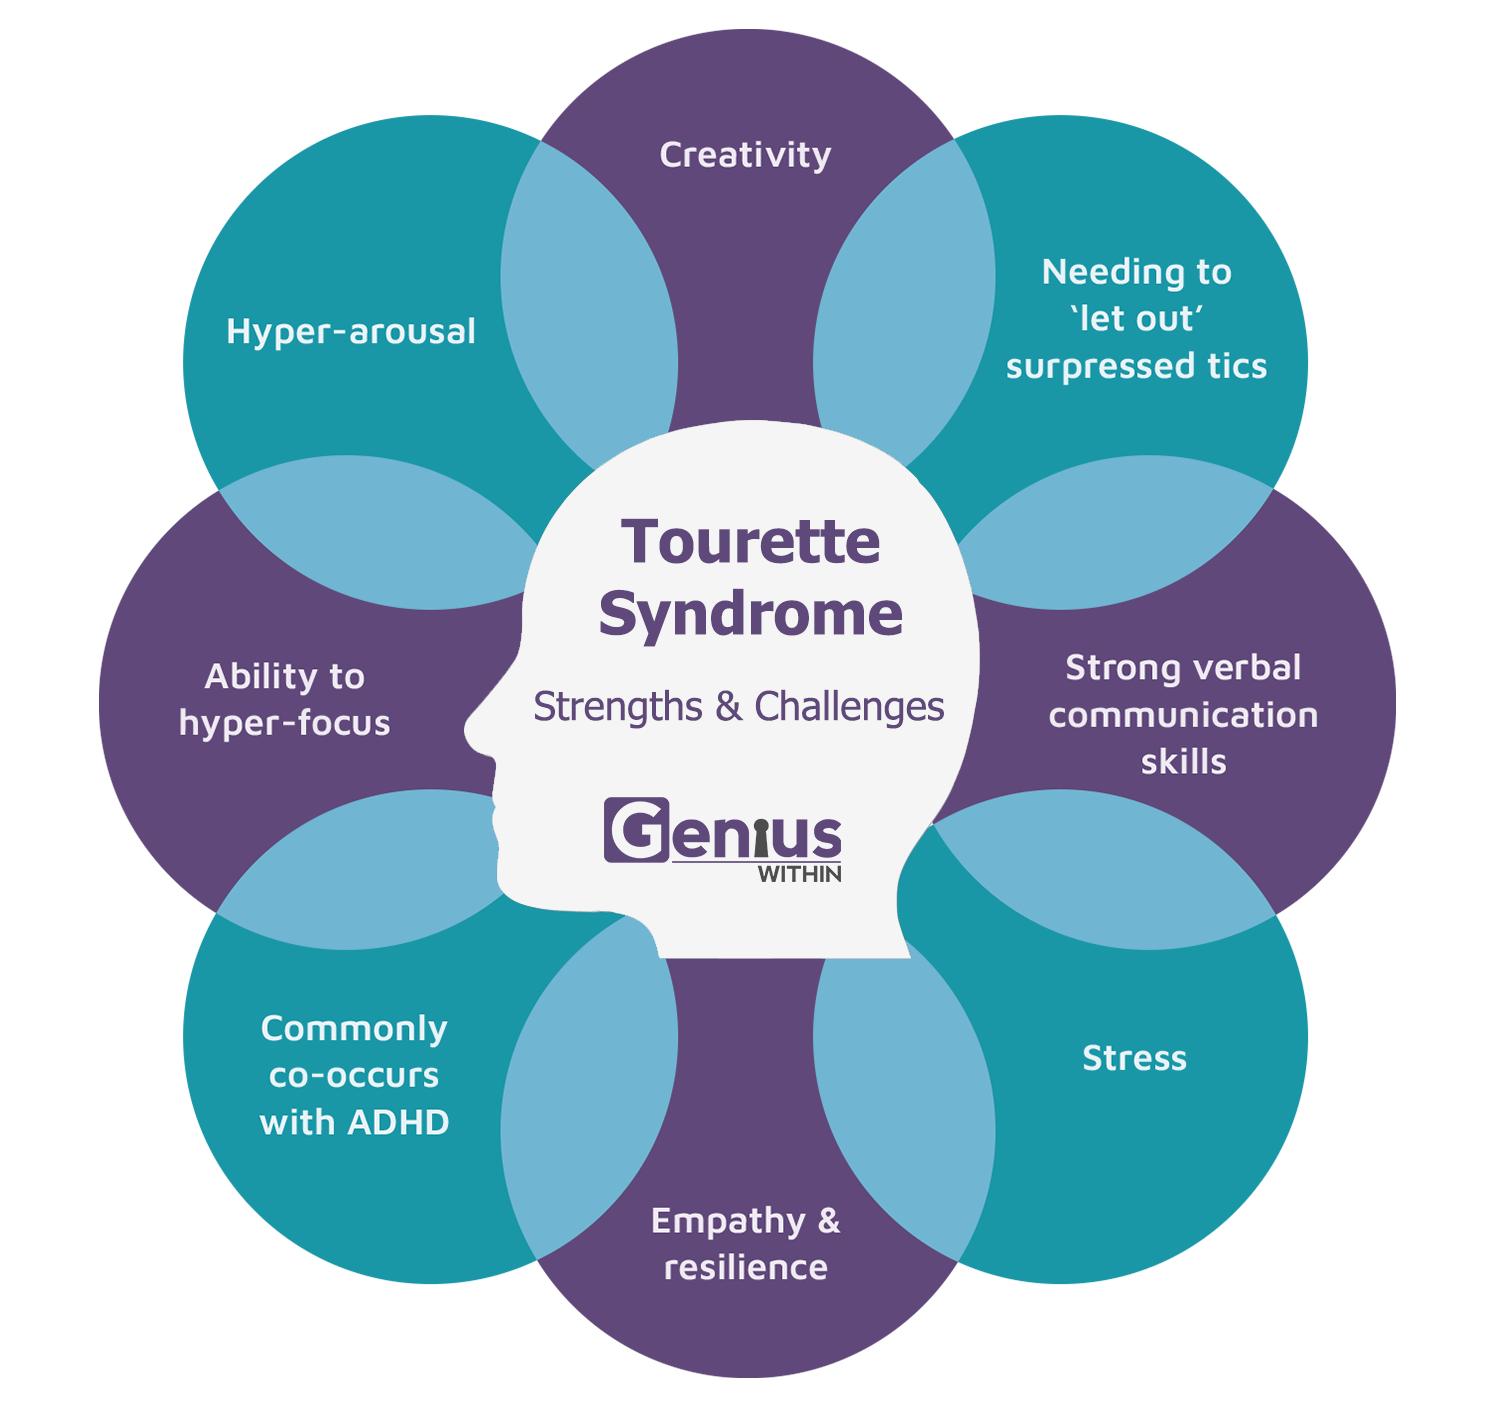 Info graphic with head at the centre and overlapping text bubbles in a circle around it. Title reads: Tourette Syndrome, strengths and challenges. The strengths and challenges are listed as follows; creativity, needing to 'let out' supressed tics, strong verbal communication skills, stress. empathy and resilience, commonly co-occurs with ADHD, ability to hyper-focus, hyper-arousal.